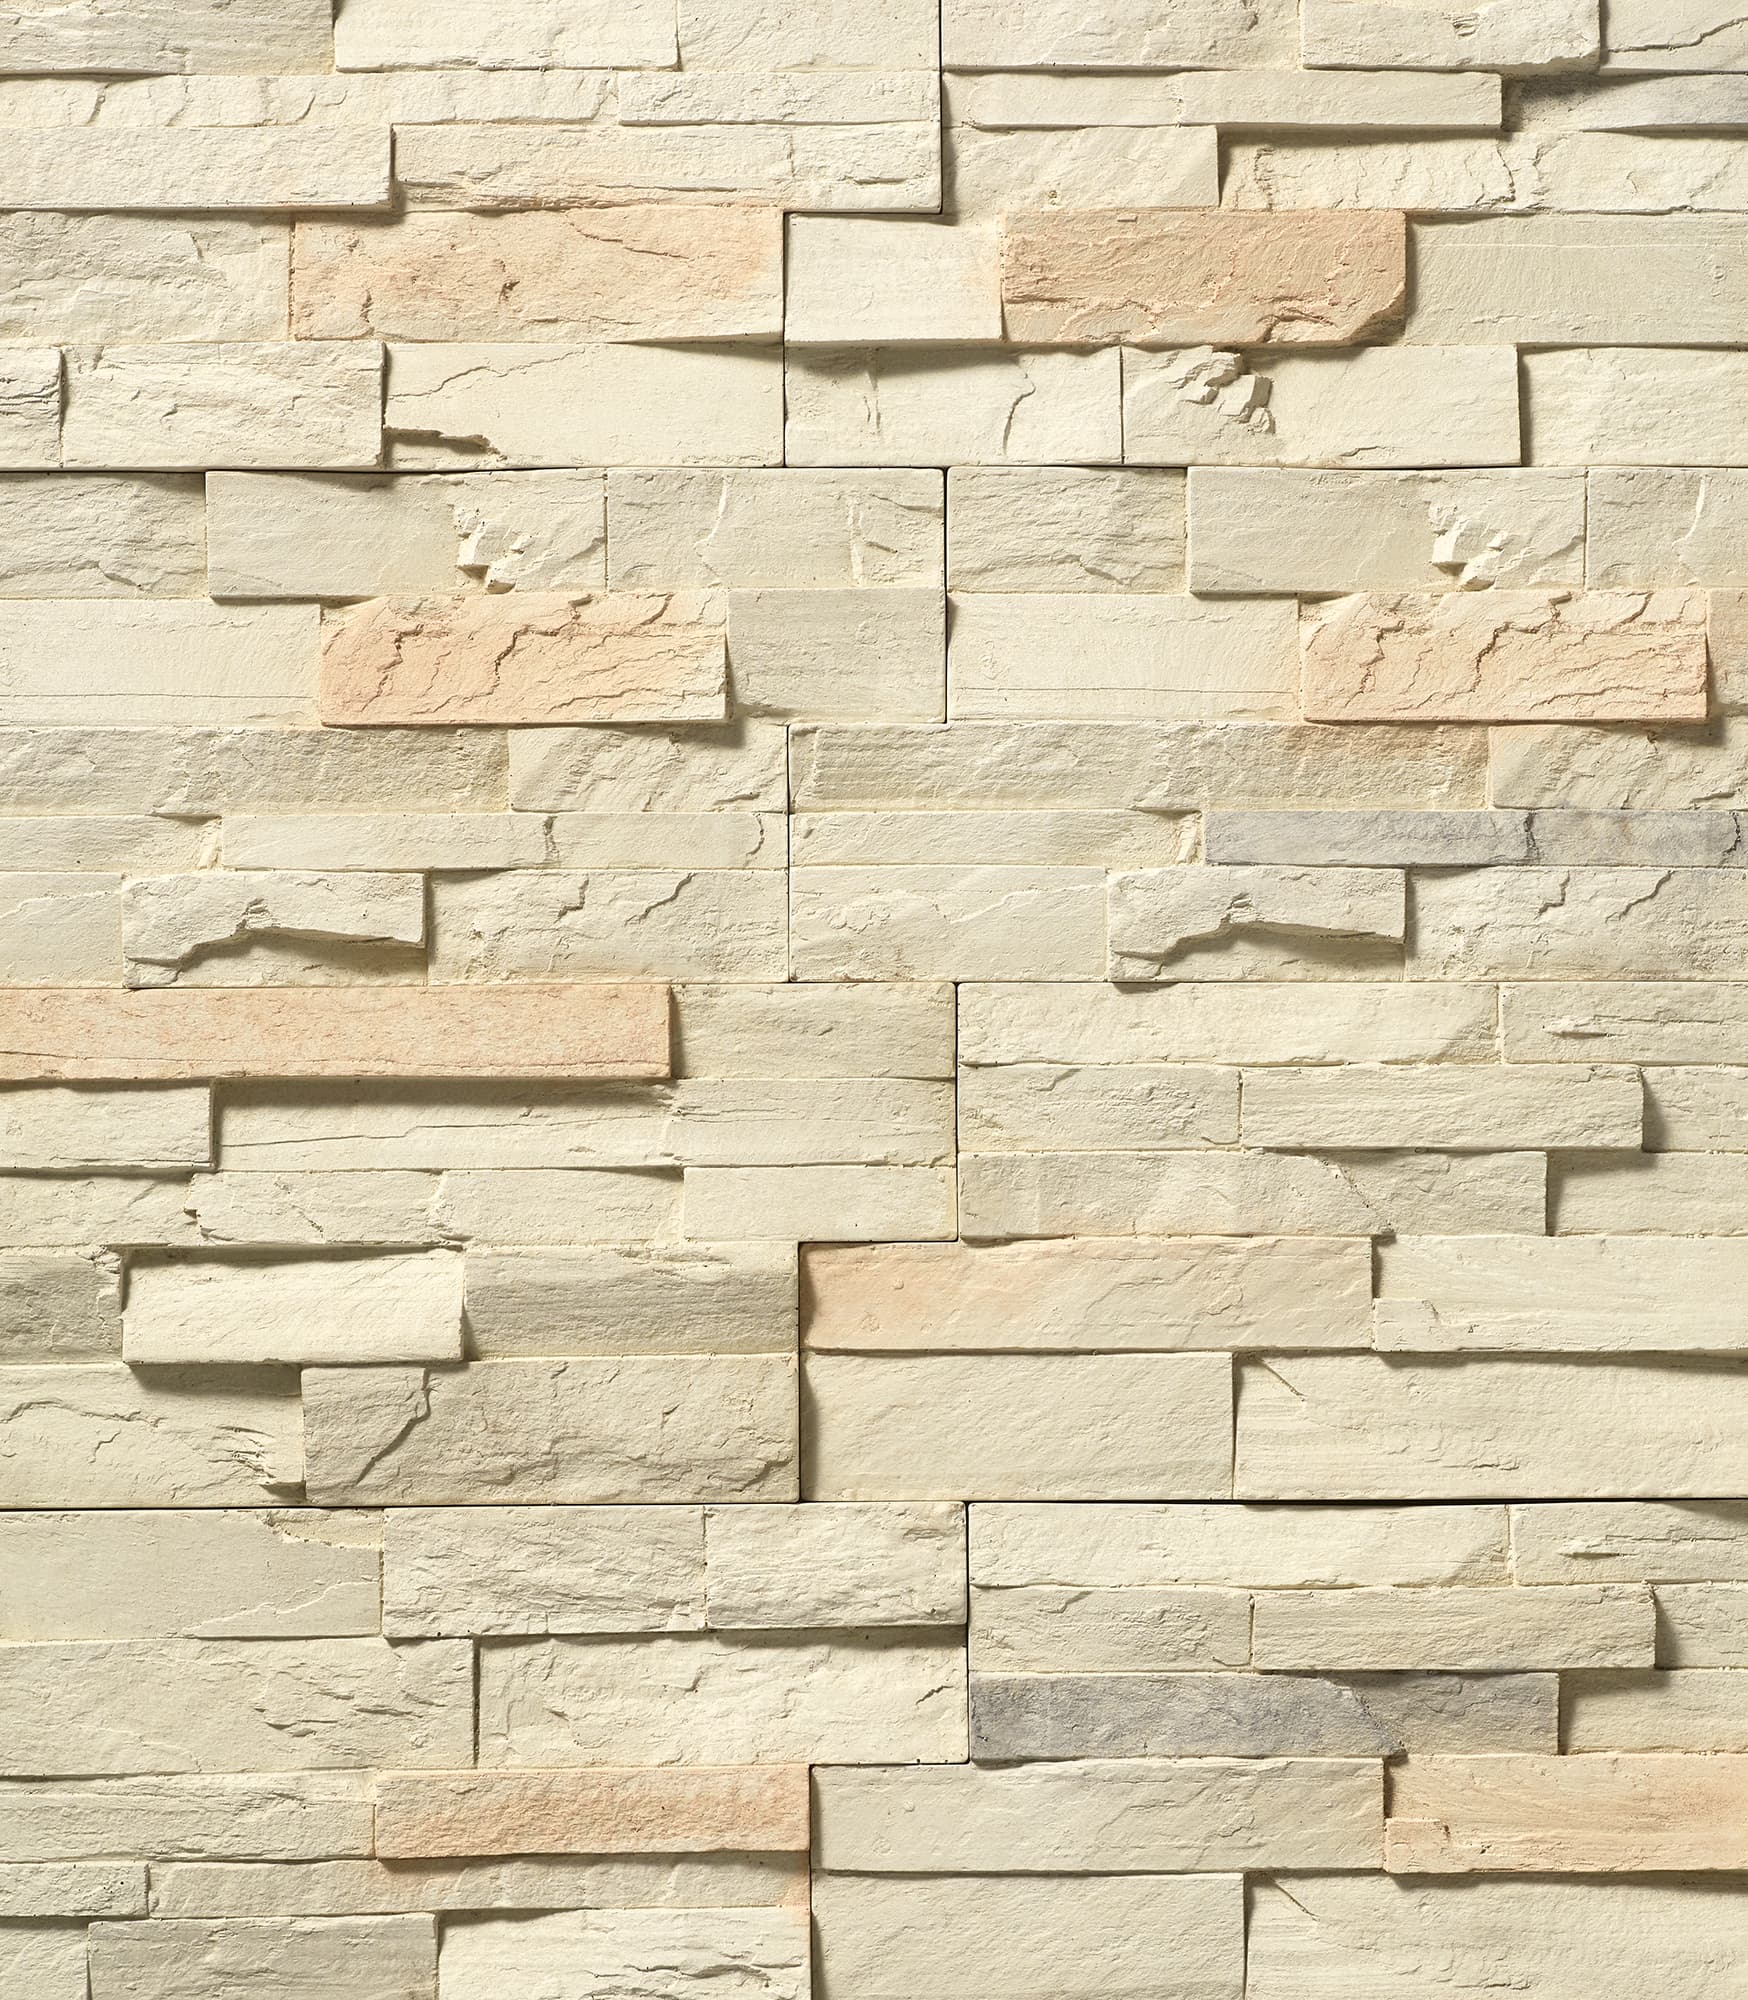 Royal Marfil Cement Ledger Stone Wall - Industry Tile